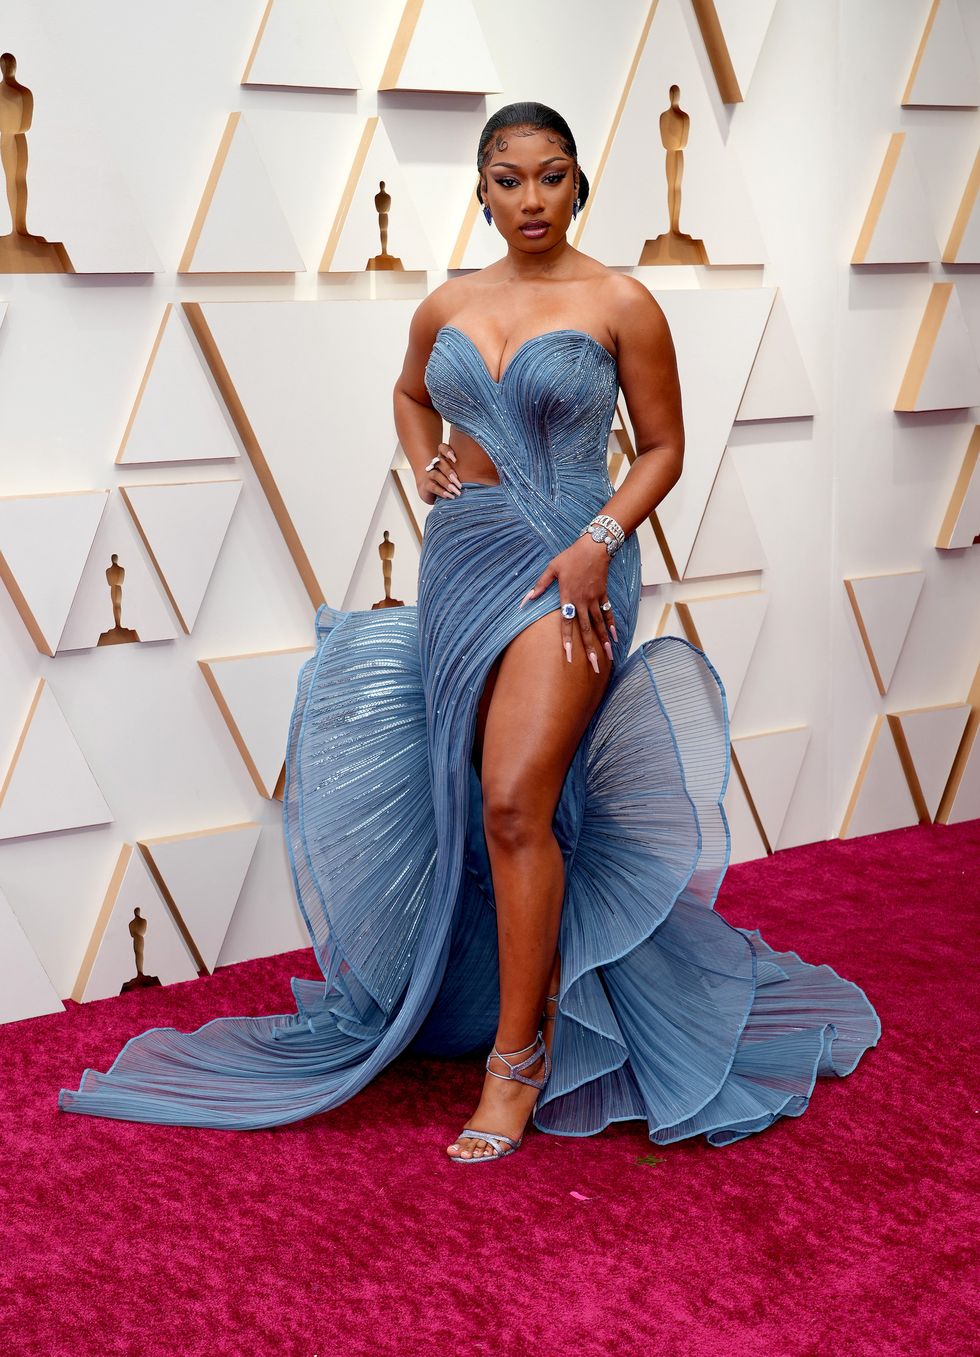 Why Is Megan Thee Stallion at the Oscars Looking So Good?